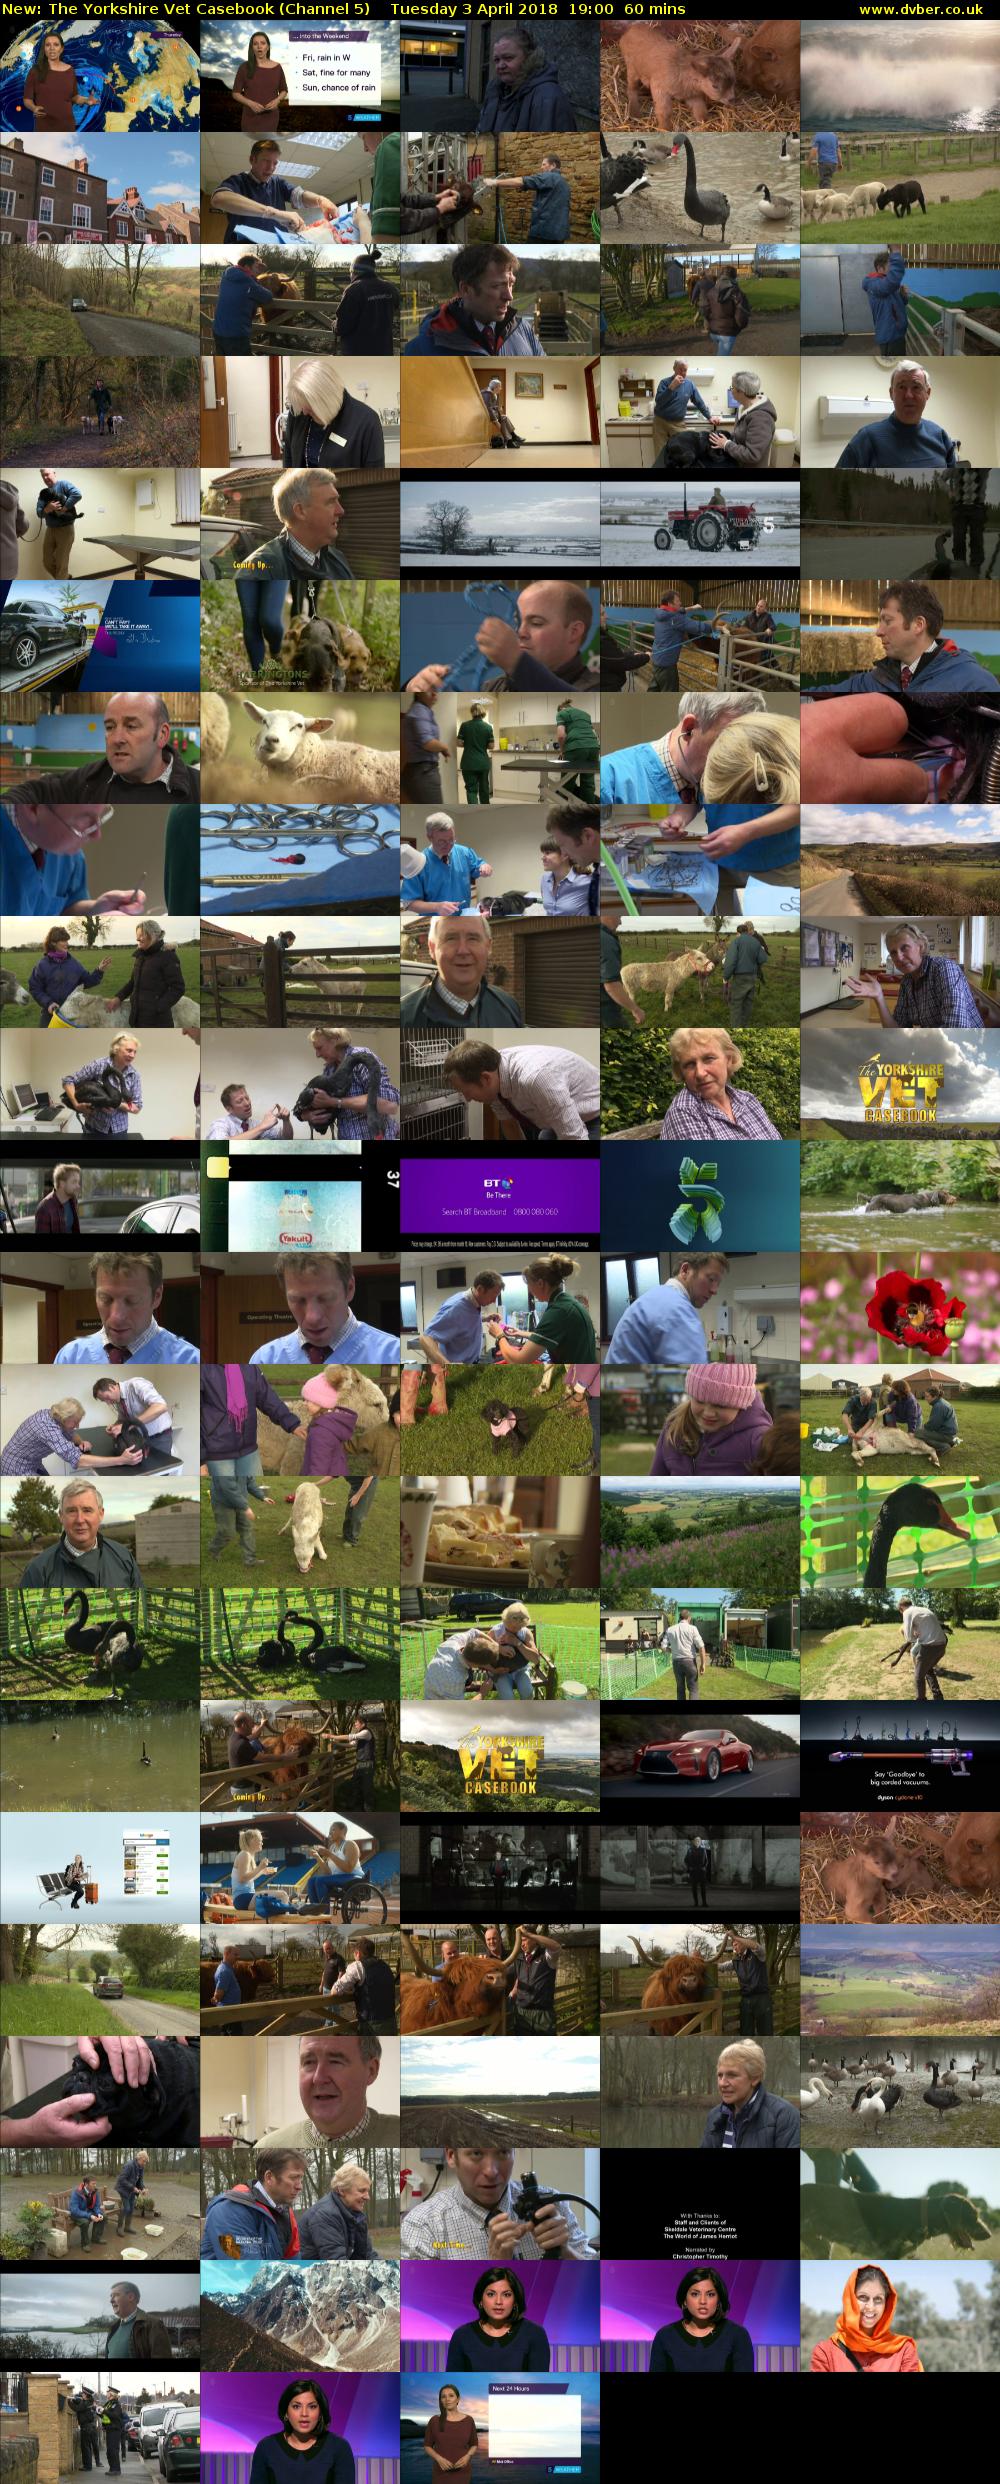 The Yorkshire Vet Casebook (Channel 5) Tuesday 3 April 2018 19:00 - 20:00